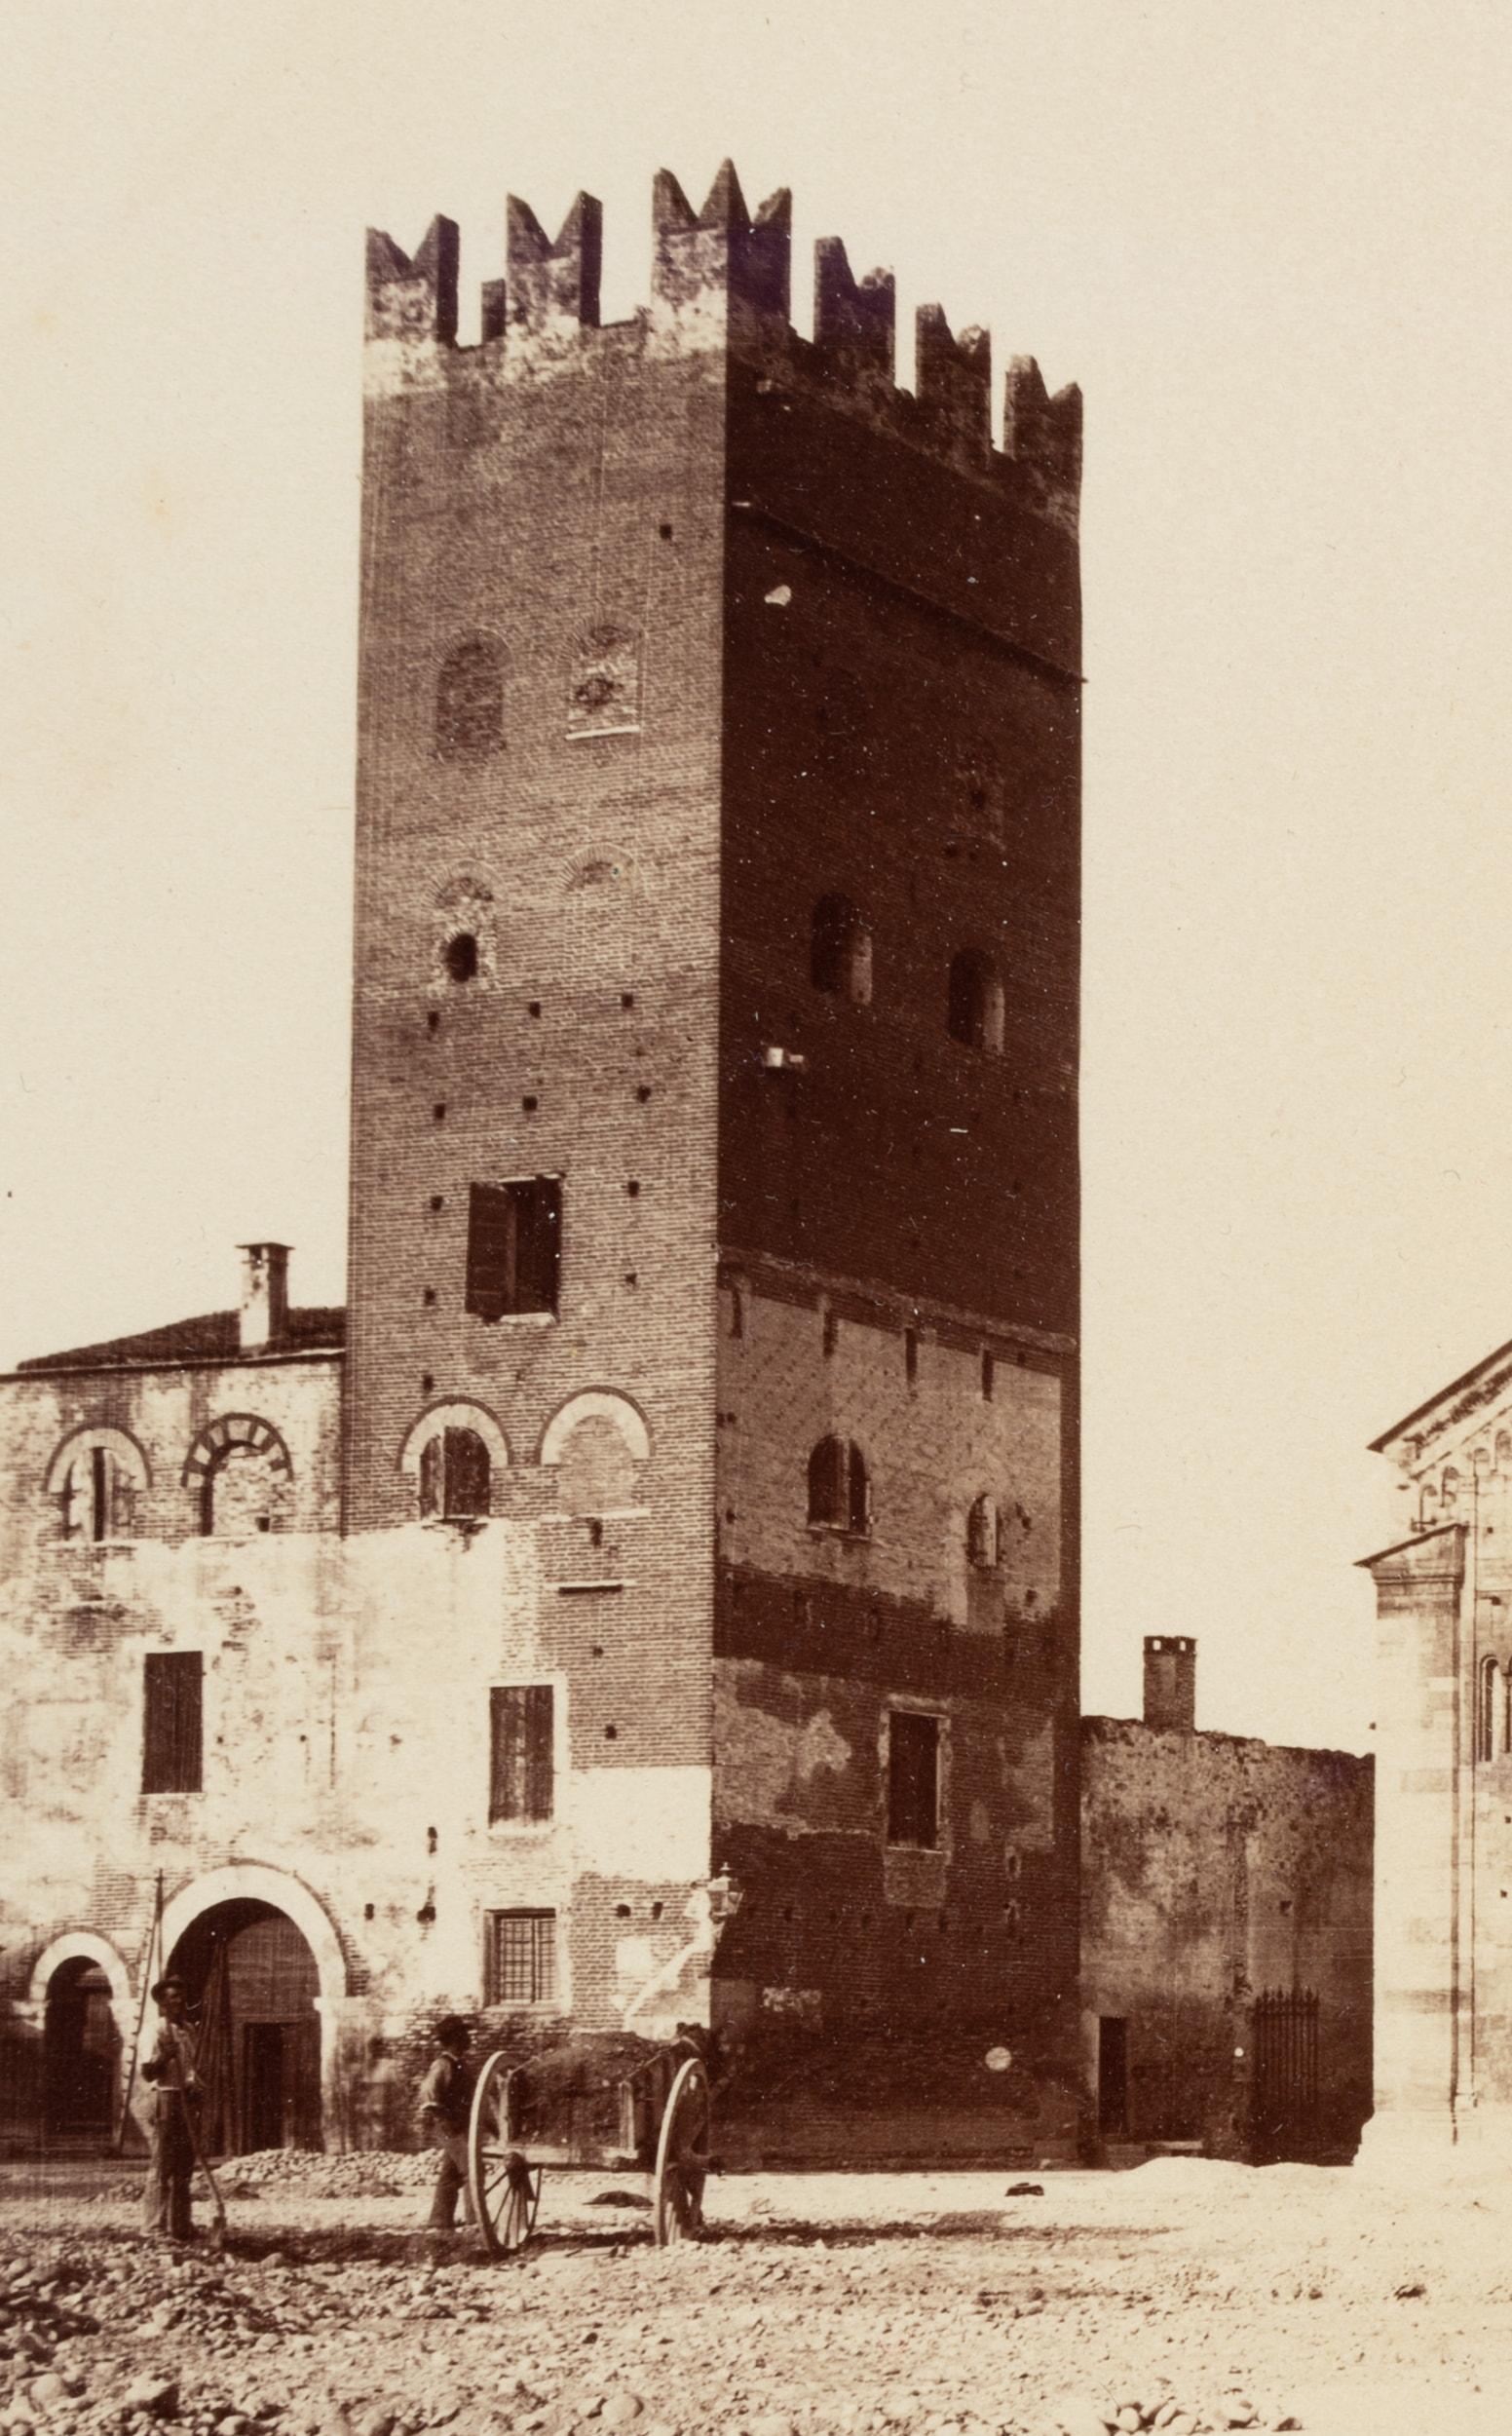 Domenico Anderson (1854 Rom - 1938 ibid.): View across the forecourt to Basilica di San Zeno with the Campanile on the right and the fortified tower on the left, Verona, c. 1880, albumen paper print

Technique: albumen paper print

Inscription: